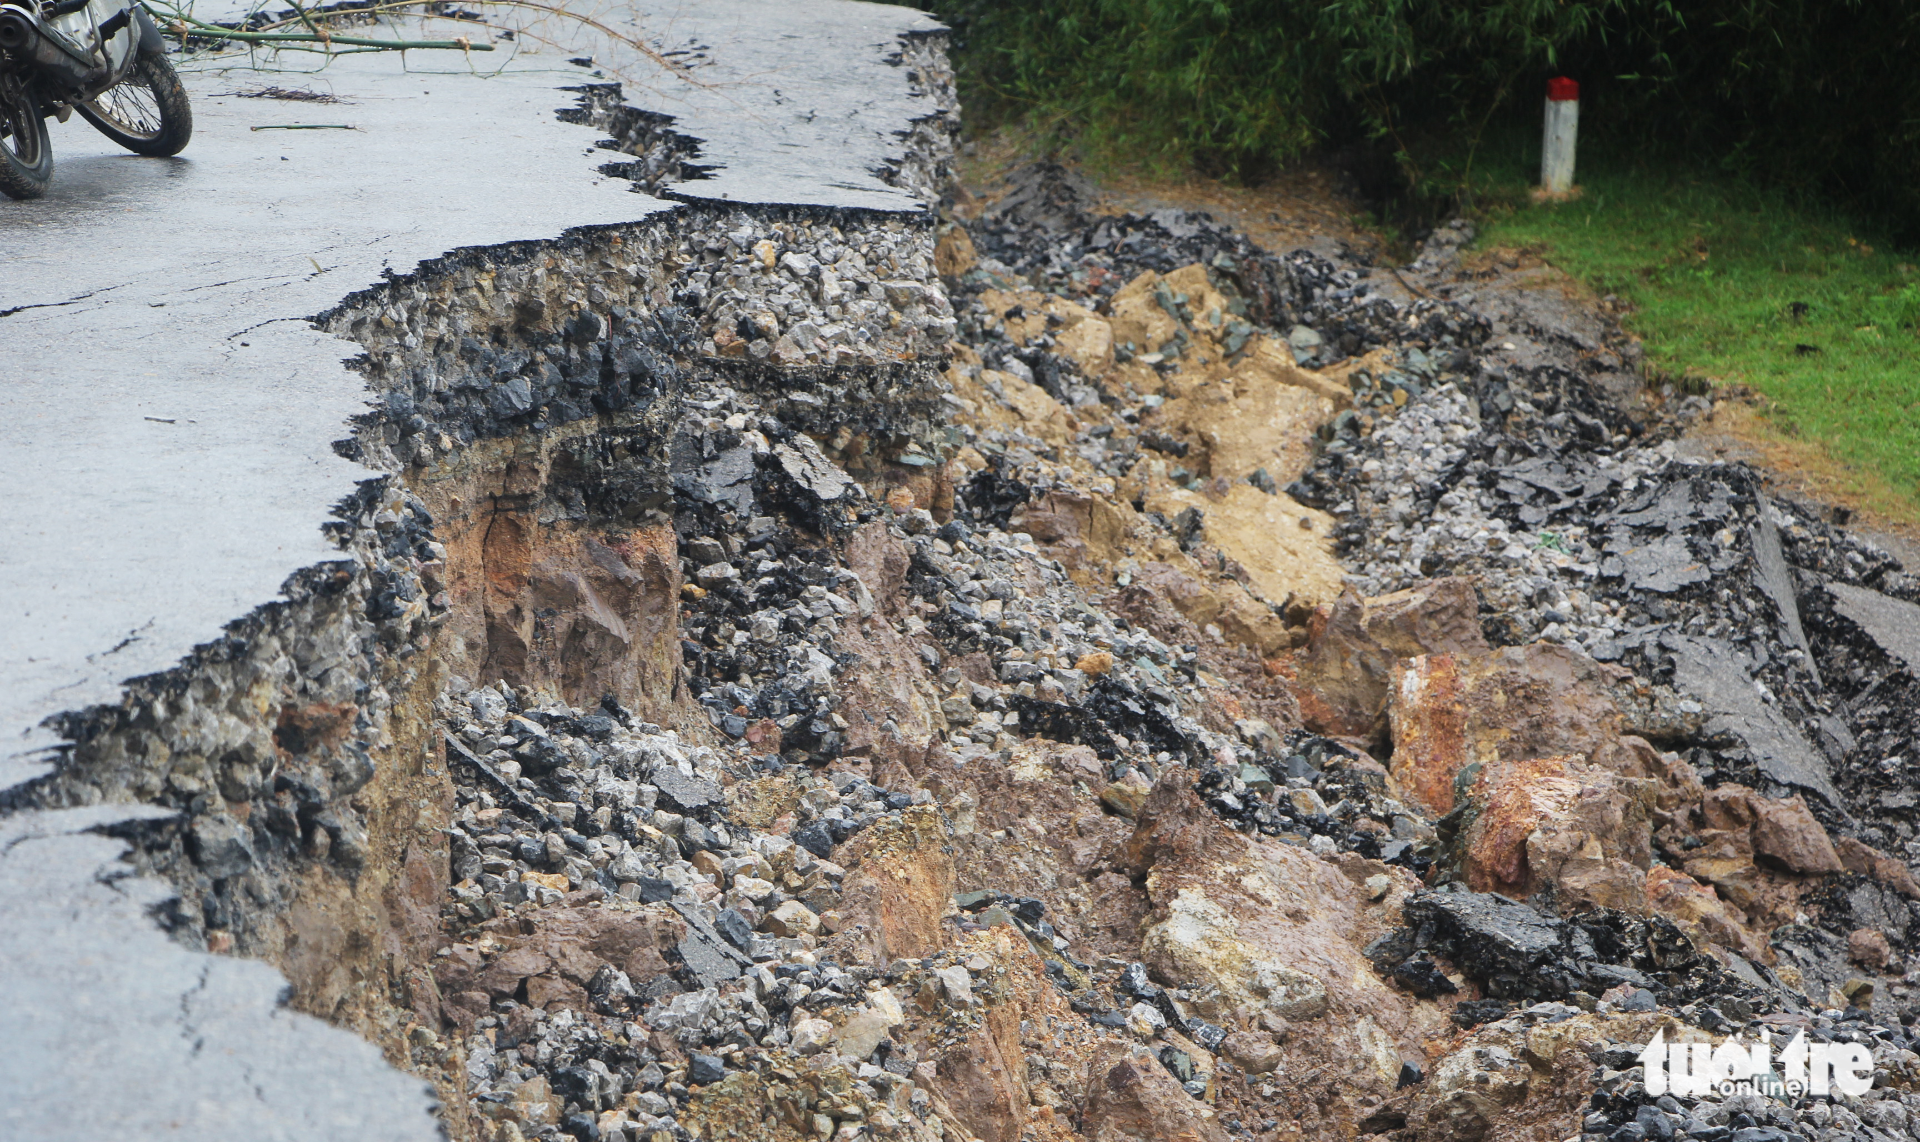 The road collapses due to subsidence. Photo: Tuoi Tre